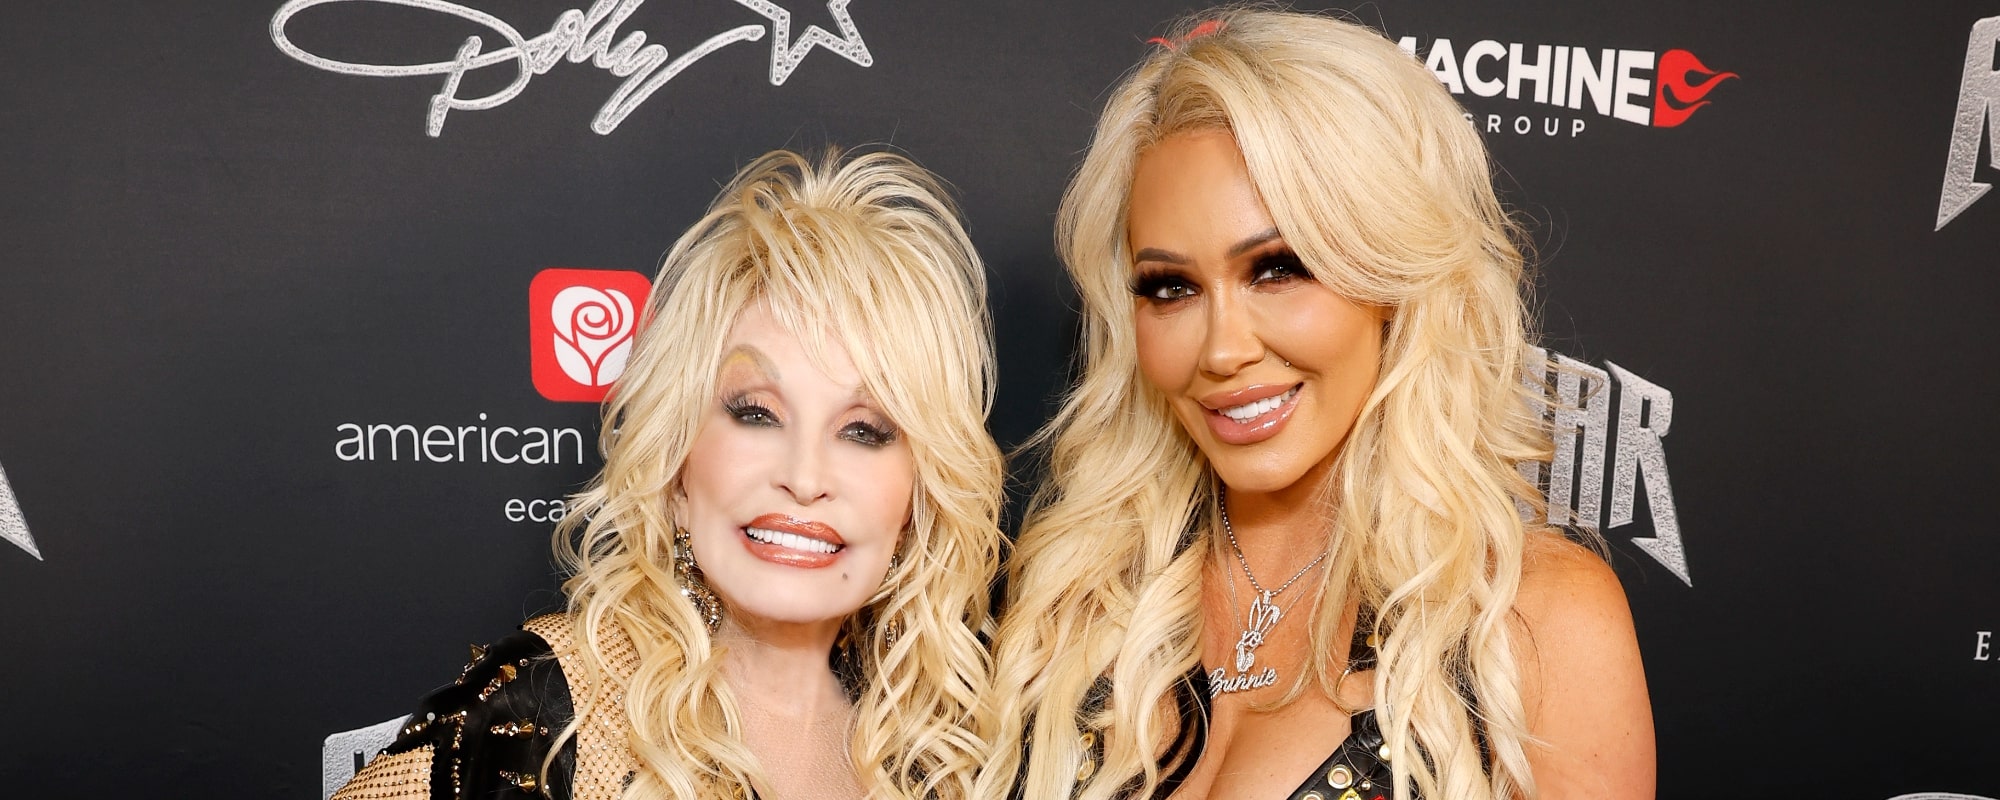 Bunnie Xo Shares Sweet Tribute to Her “Birthday Cusp Twin” Dolly Parton